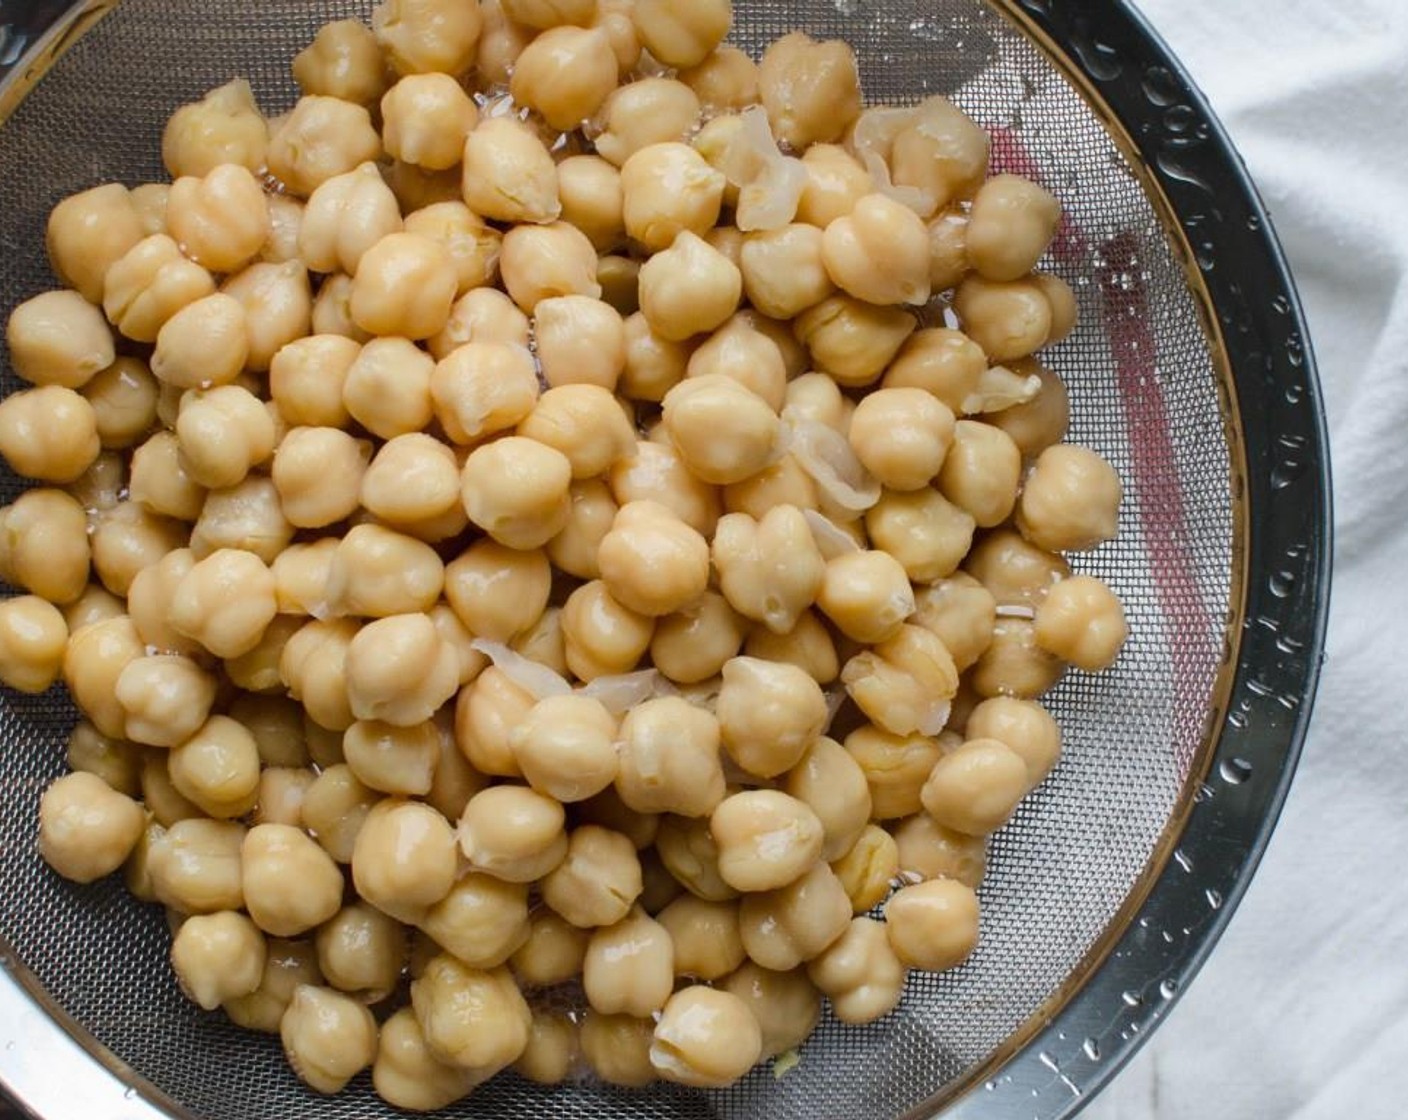 step 2 Rinse and drain the Canned Chickpeas (4 cups) in a strainer. Line a large rimmed sheet pan with paper towels.